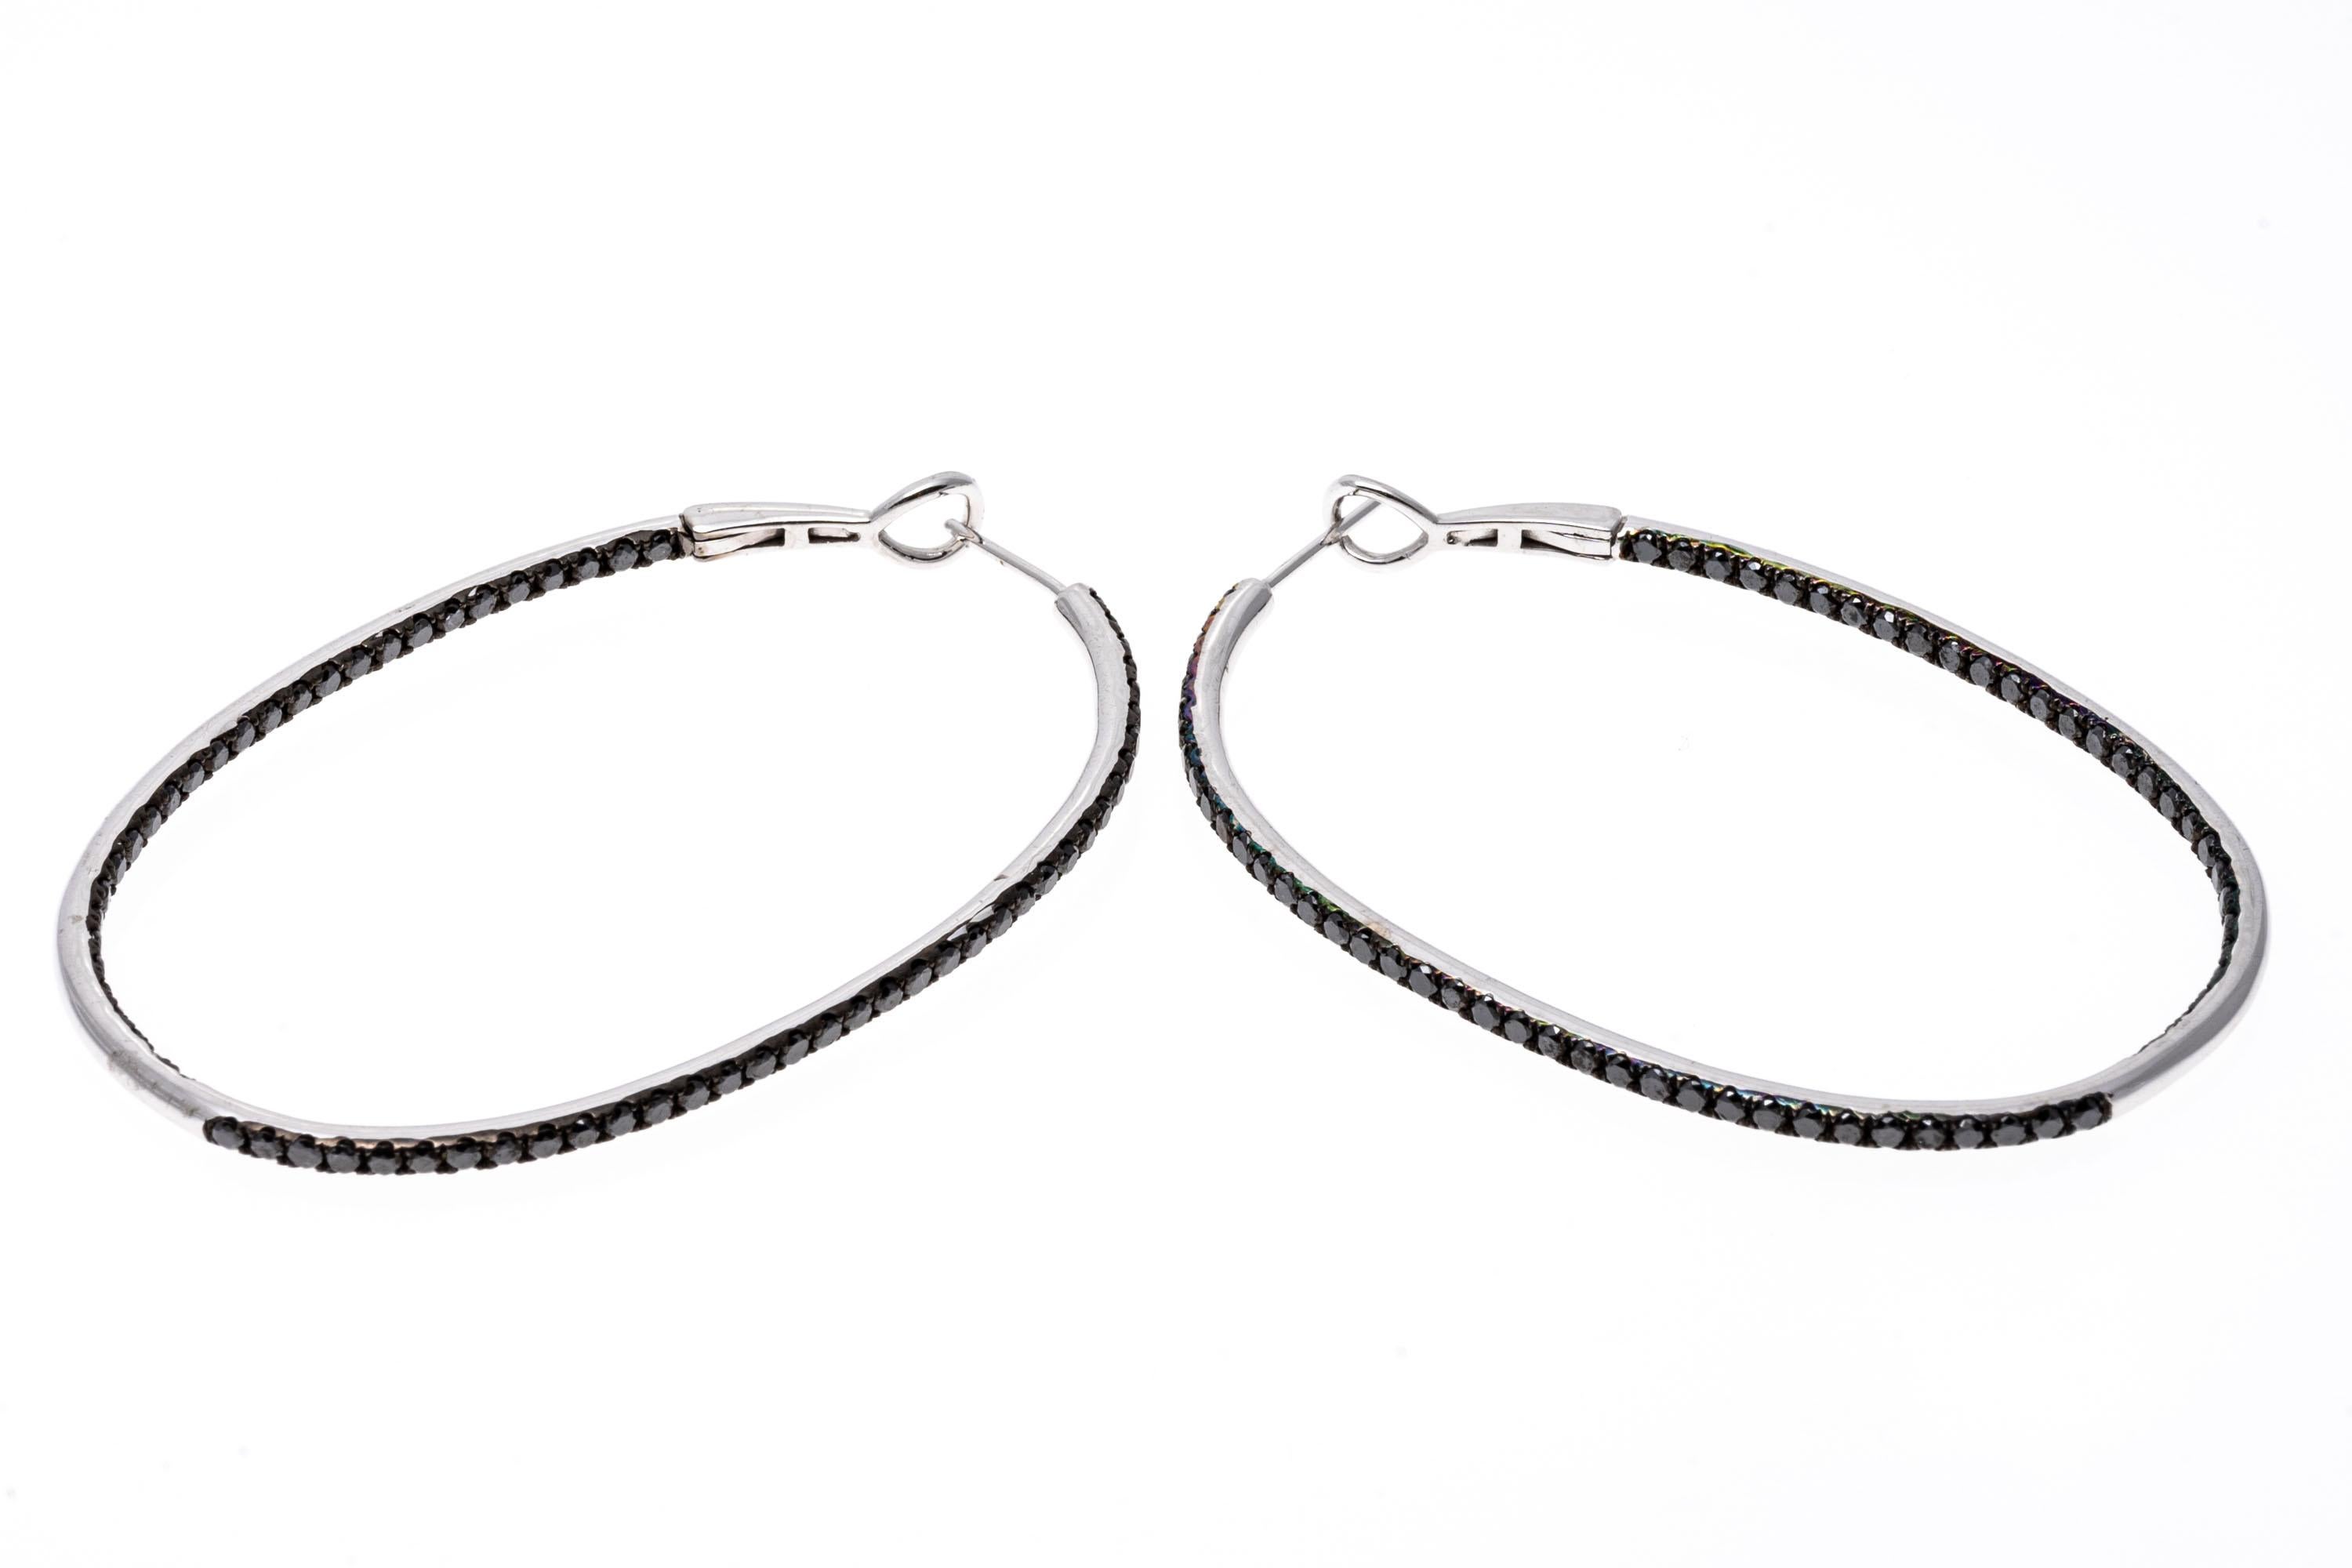 These graceful elongated hoop earrings are crafted of 14K white gold.  Black diamonds trail over the face of the earrings as well as over the inside. The diamonds are approximately 3.4 TCW. Post and leaver backings.
Marks: 14K 585
Dimensions: 2 1/4